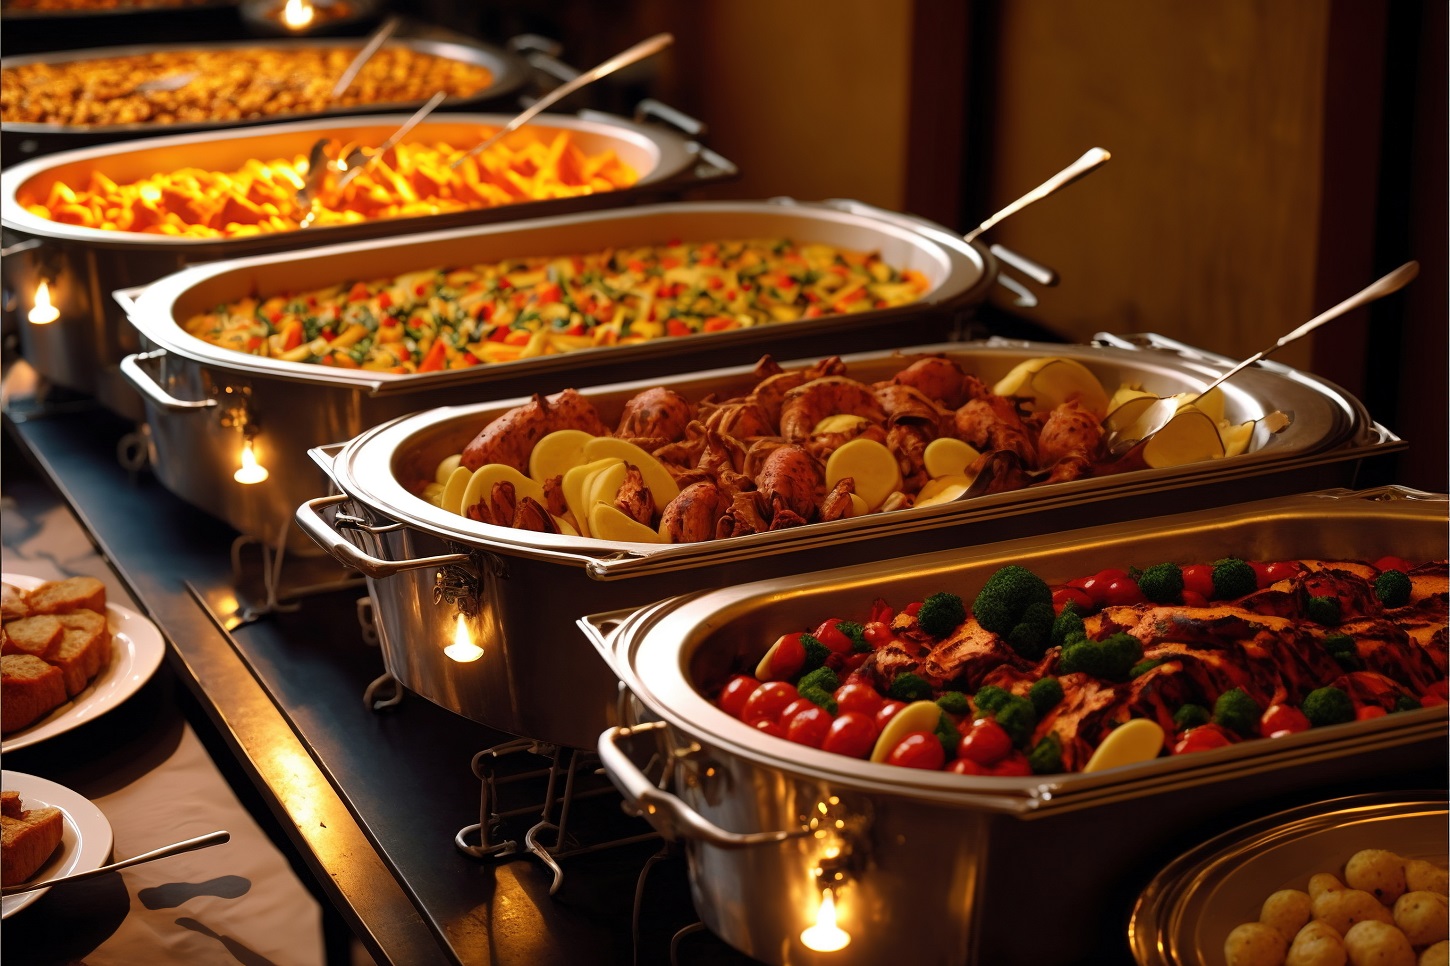 Habayit is the Best Kosher Catering Service for Special Occasions in Santa Monica